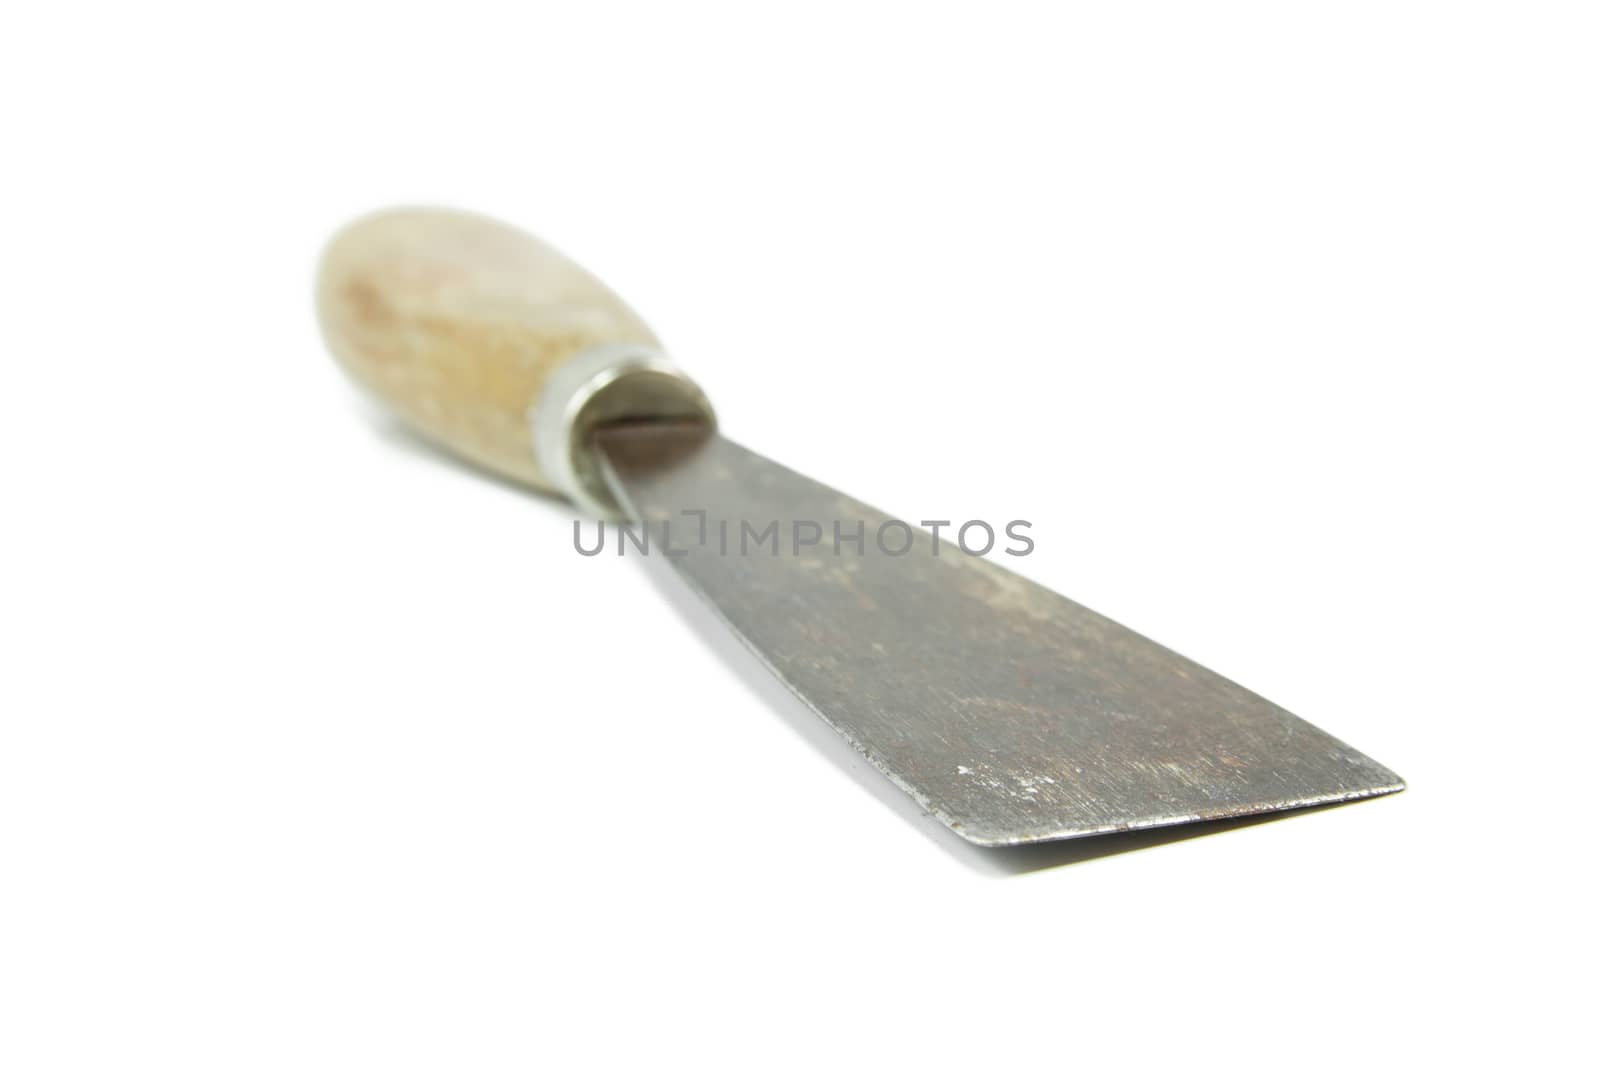 Trowel with wooden handle isolated on white background, shallow depth of field